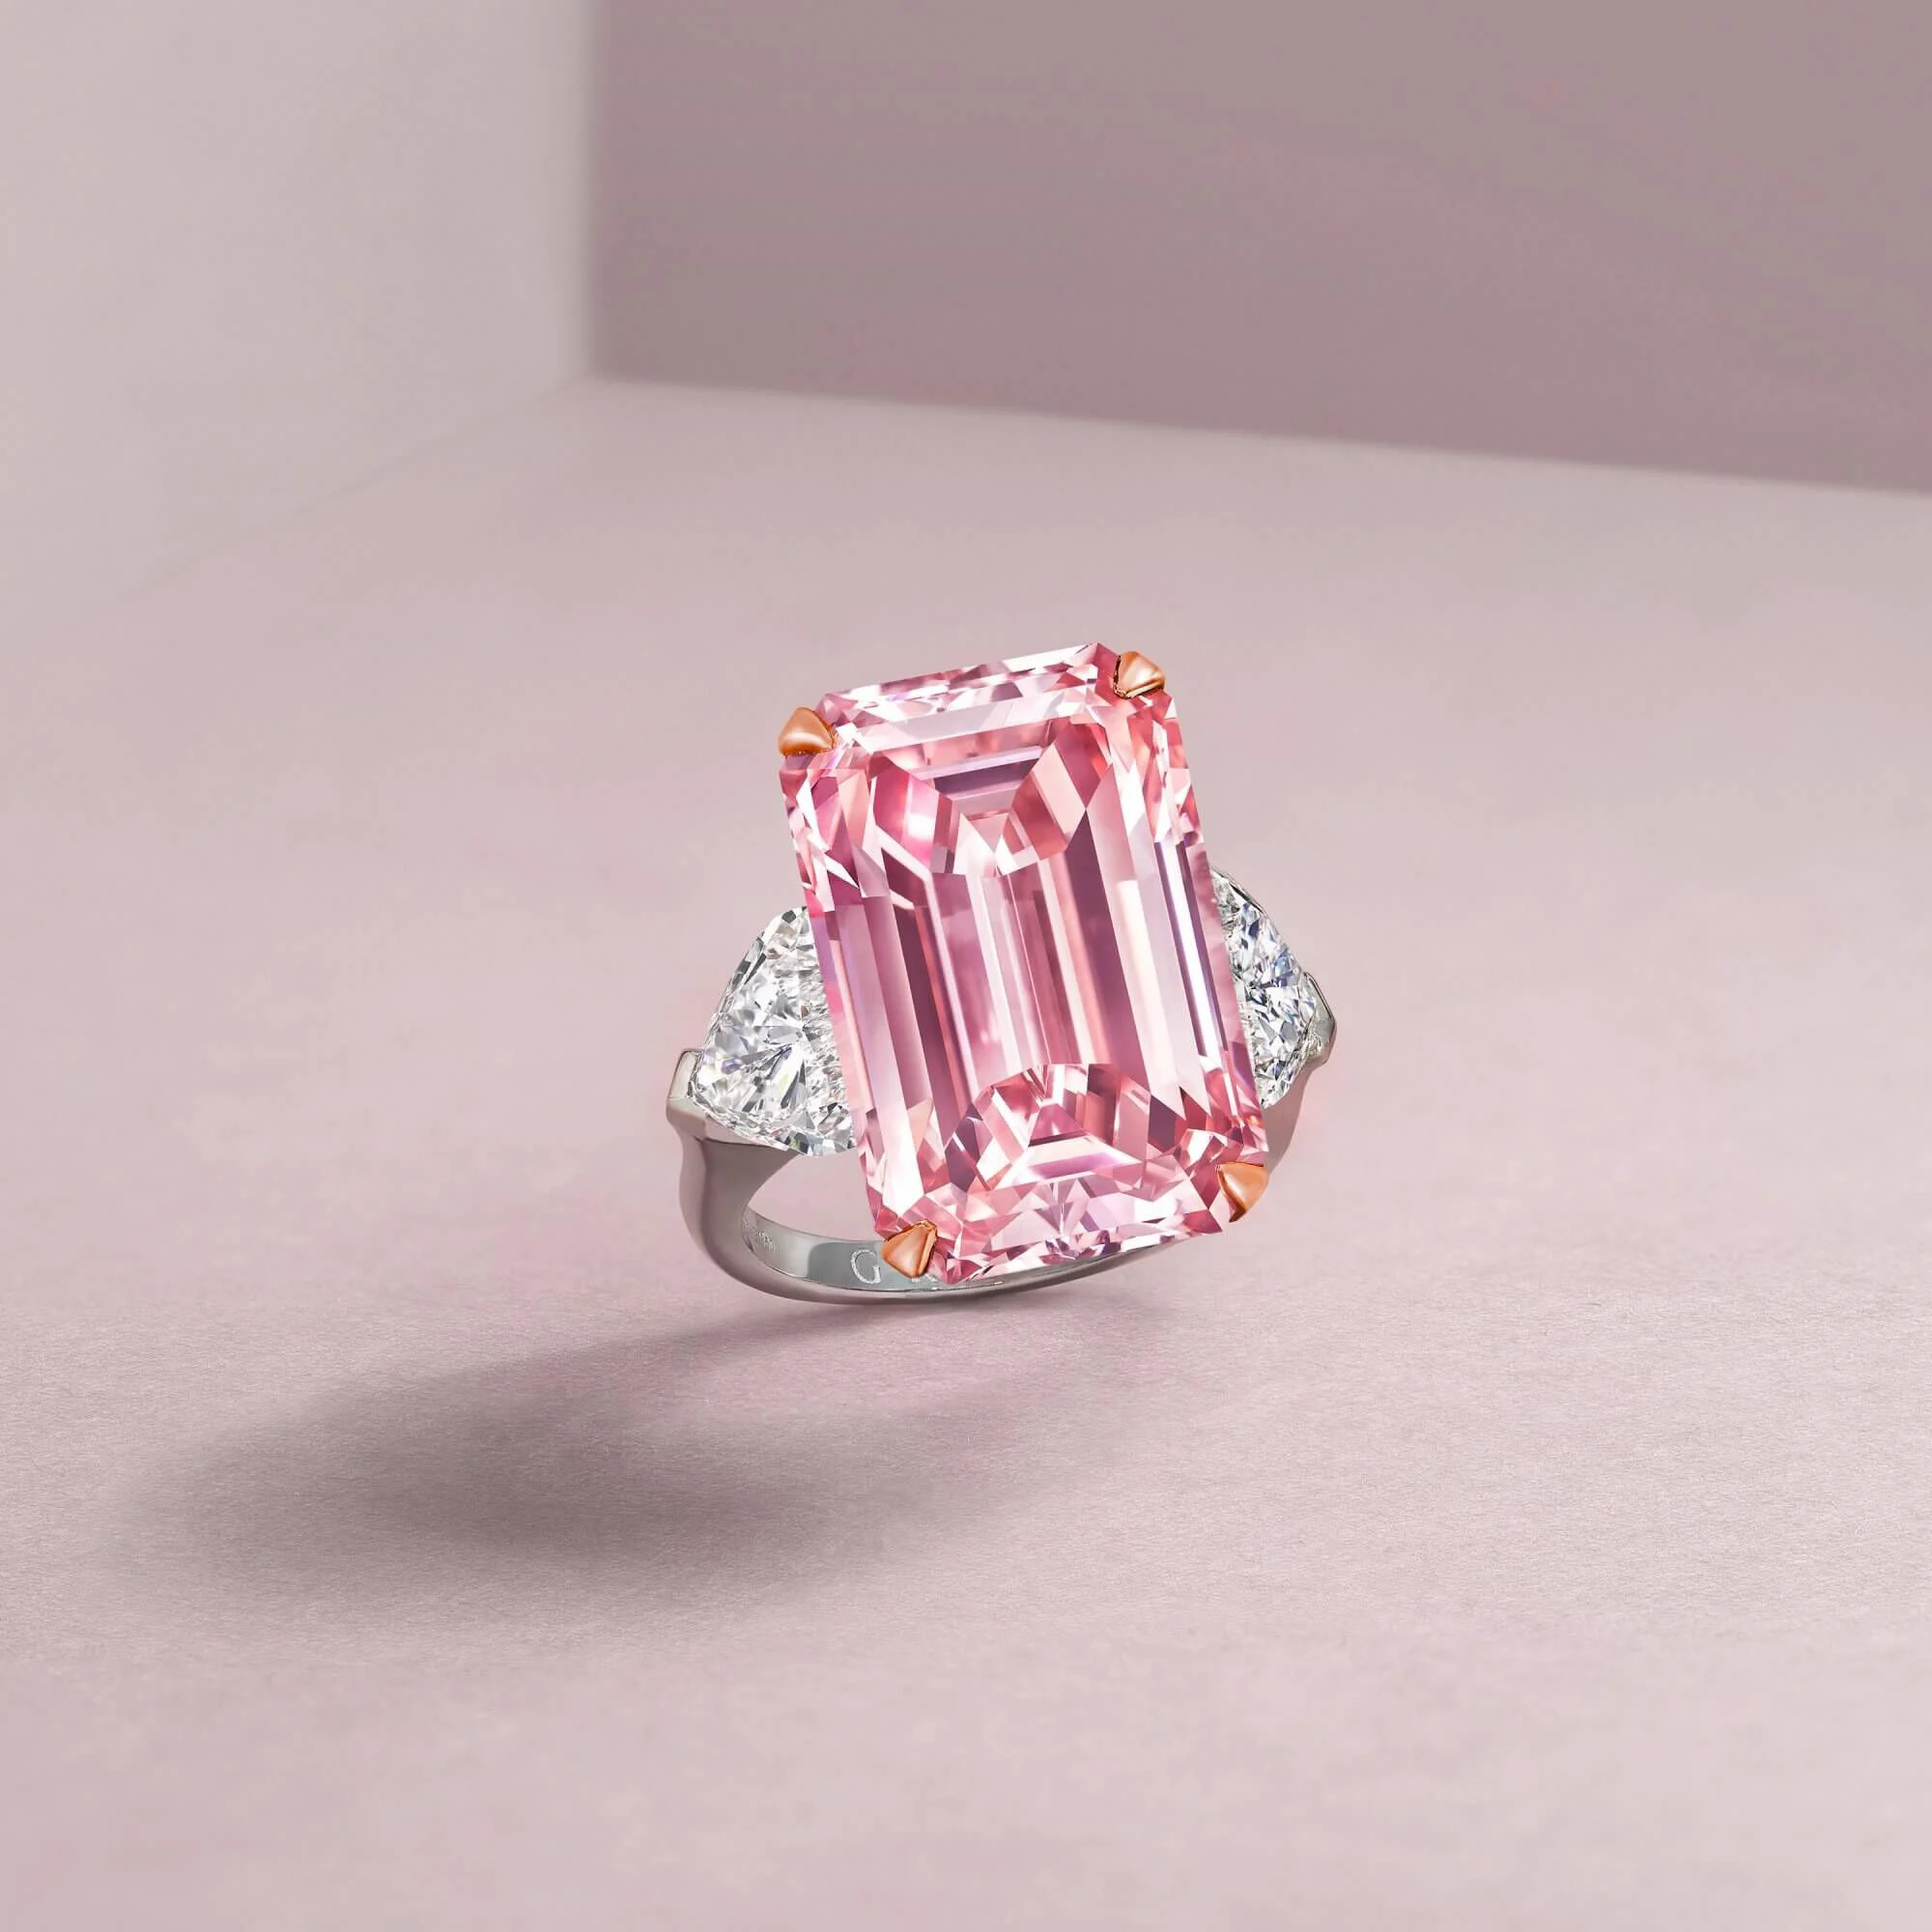 Laurence Graff holding the Graff Pink Diamond, showcasing its size and unique color.